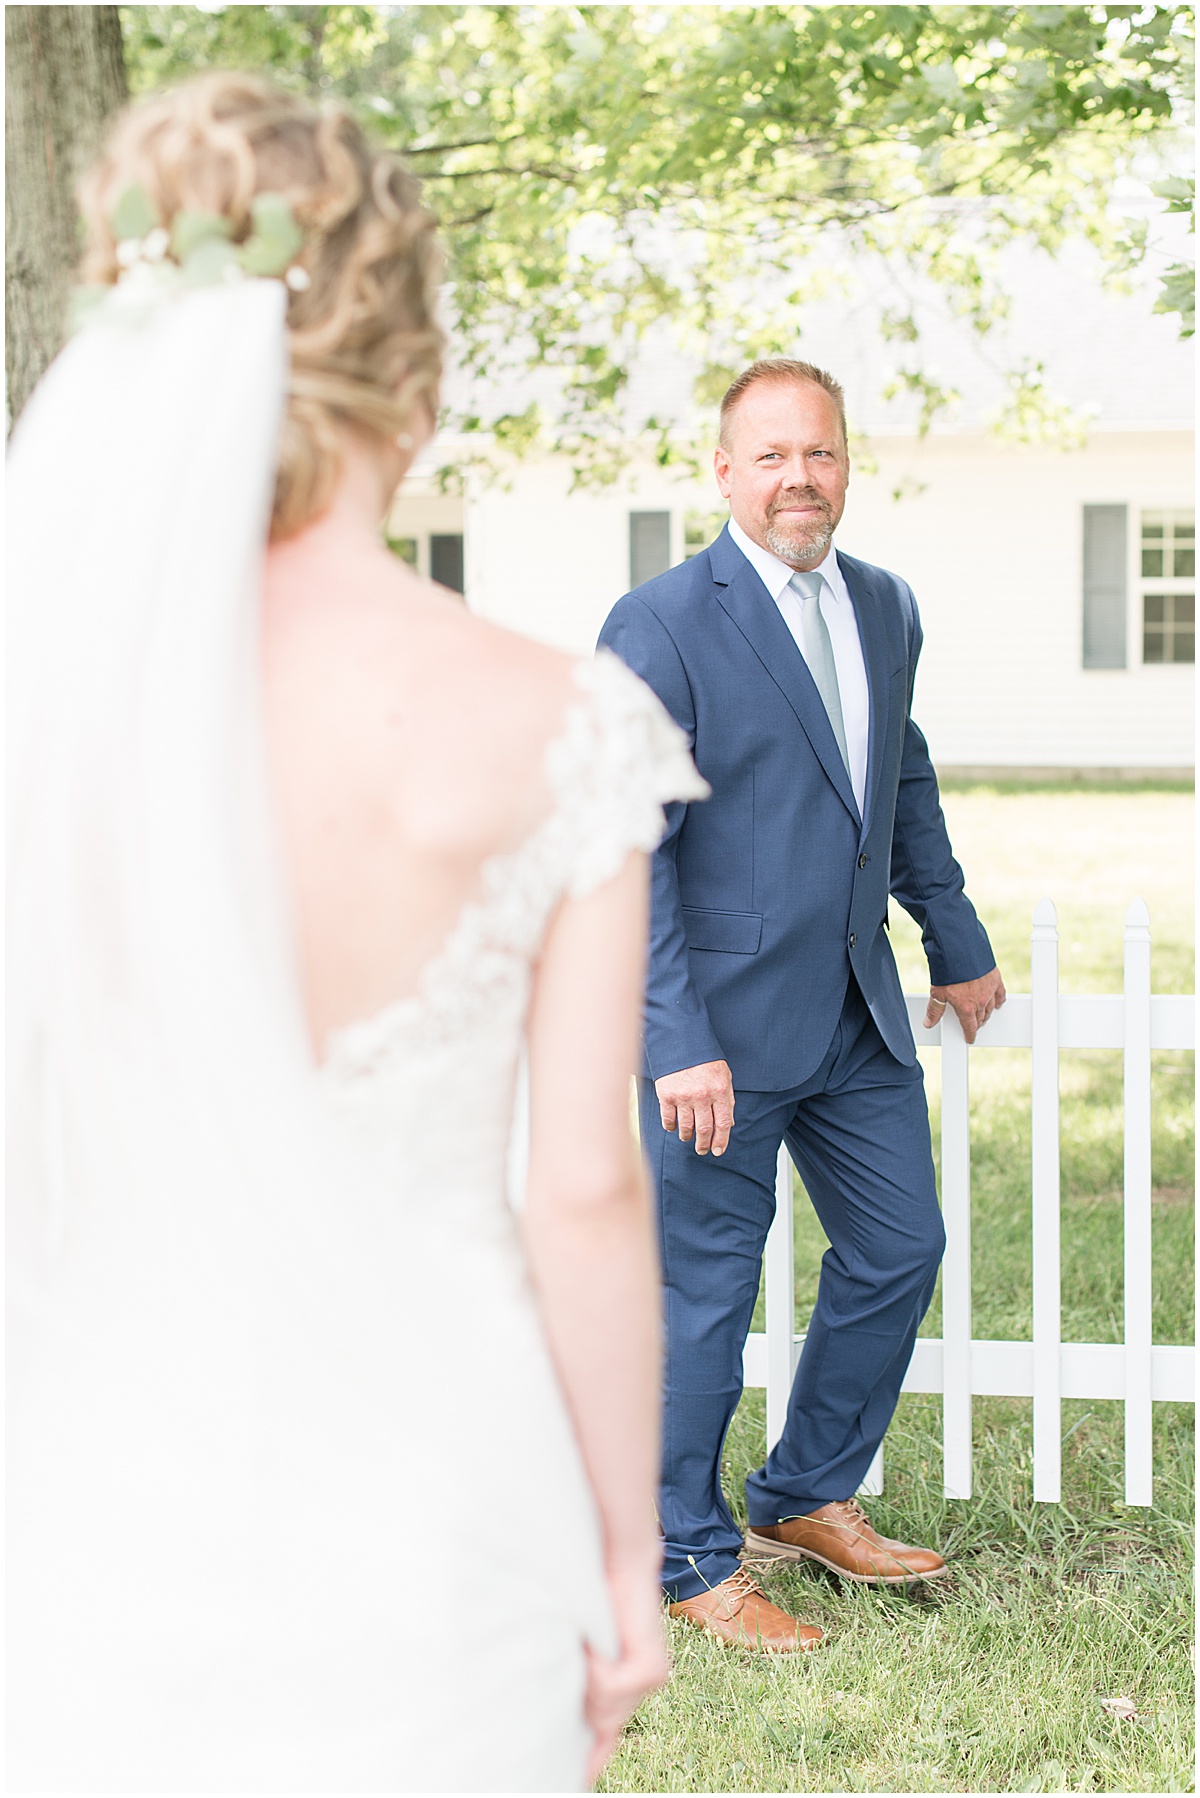 Bride's first look with her dad before wedding at The Matterhorn in Elkhart, Indiana